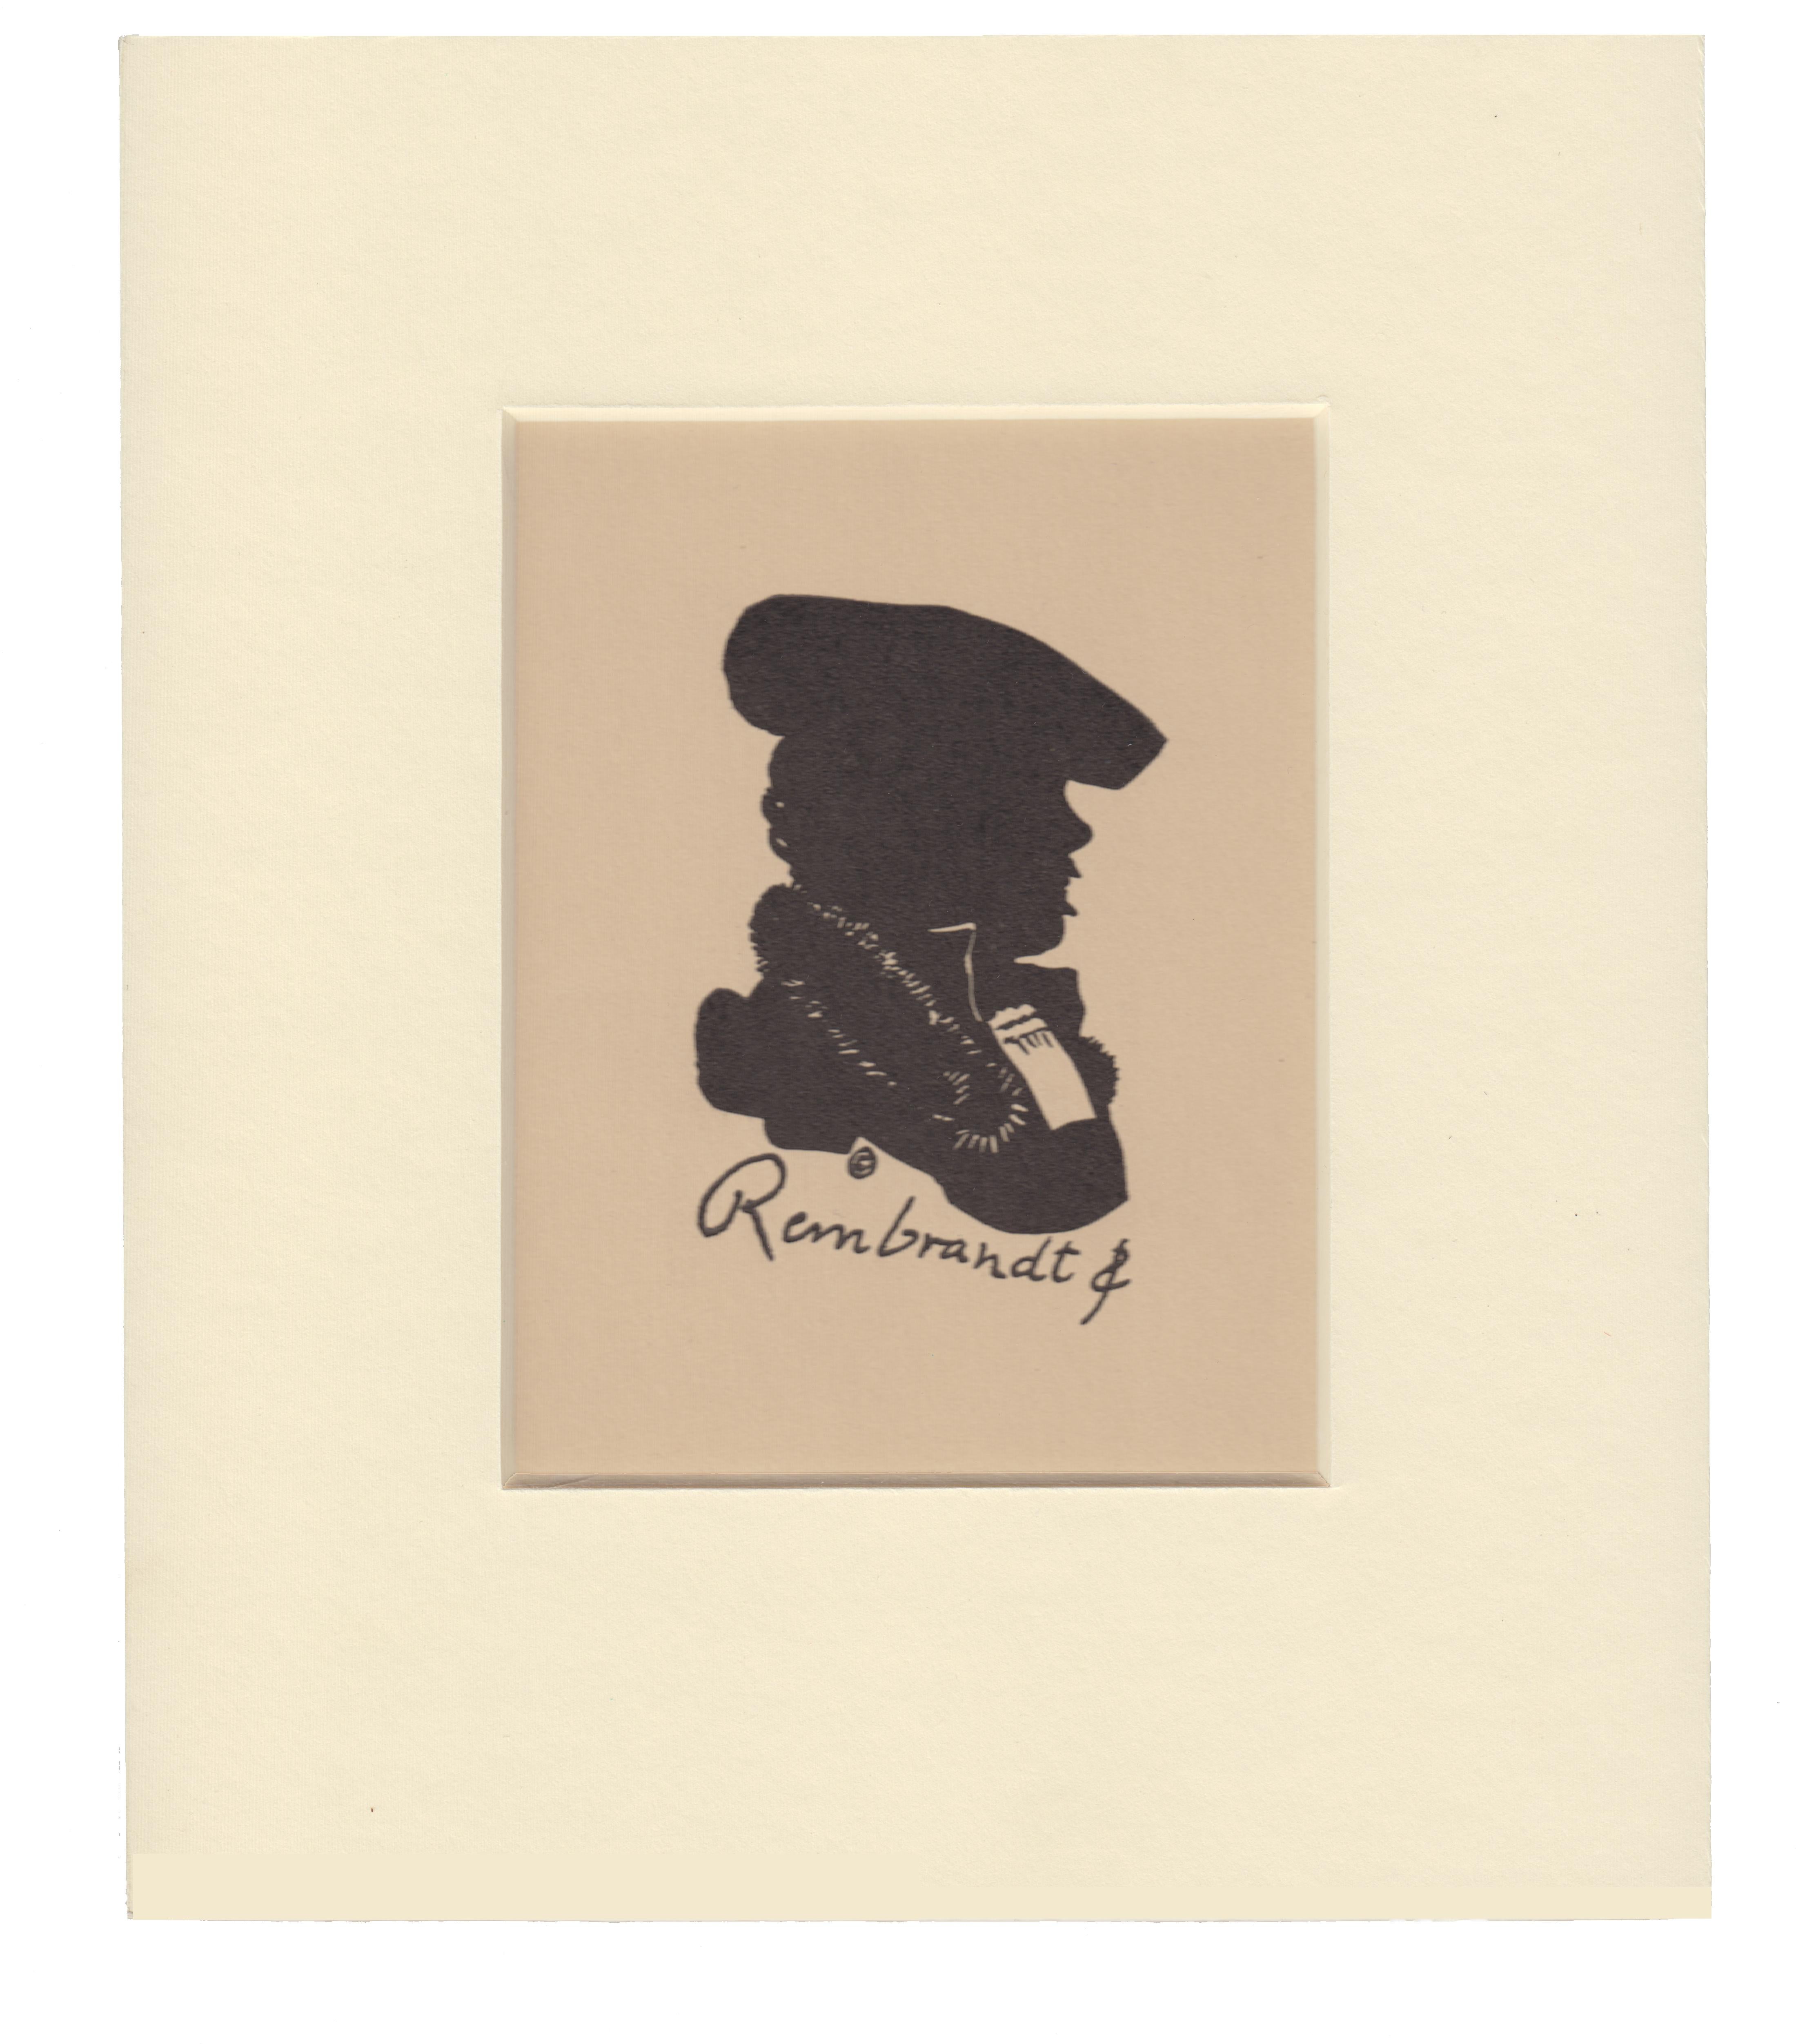 Silhouette of Rembrandt - Print by Unknown